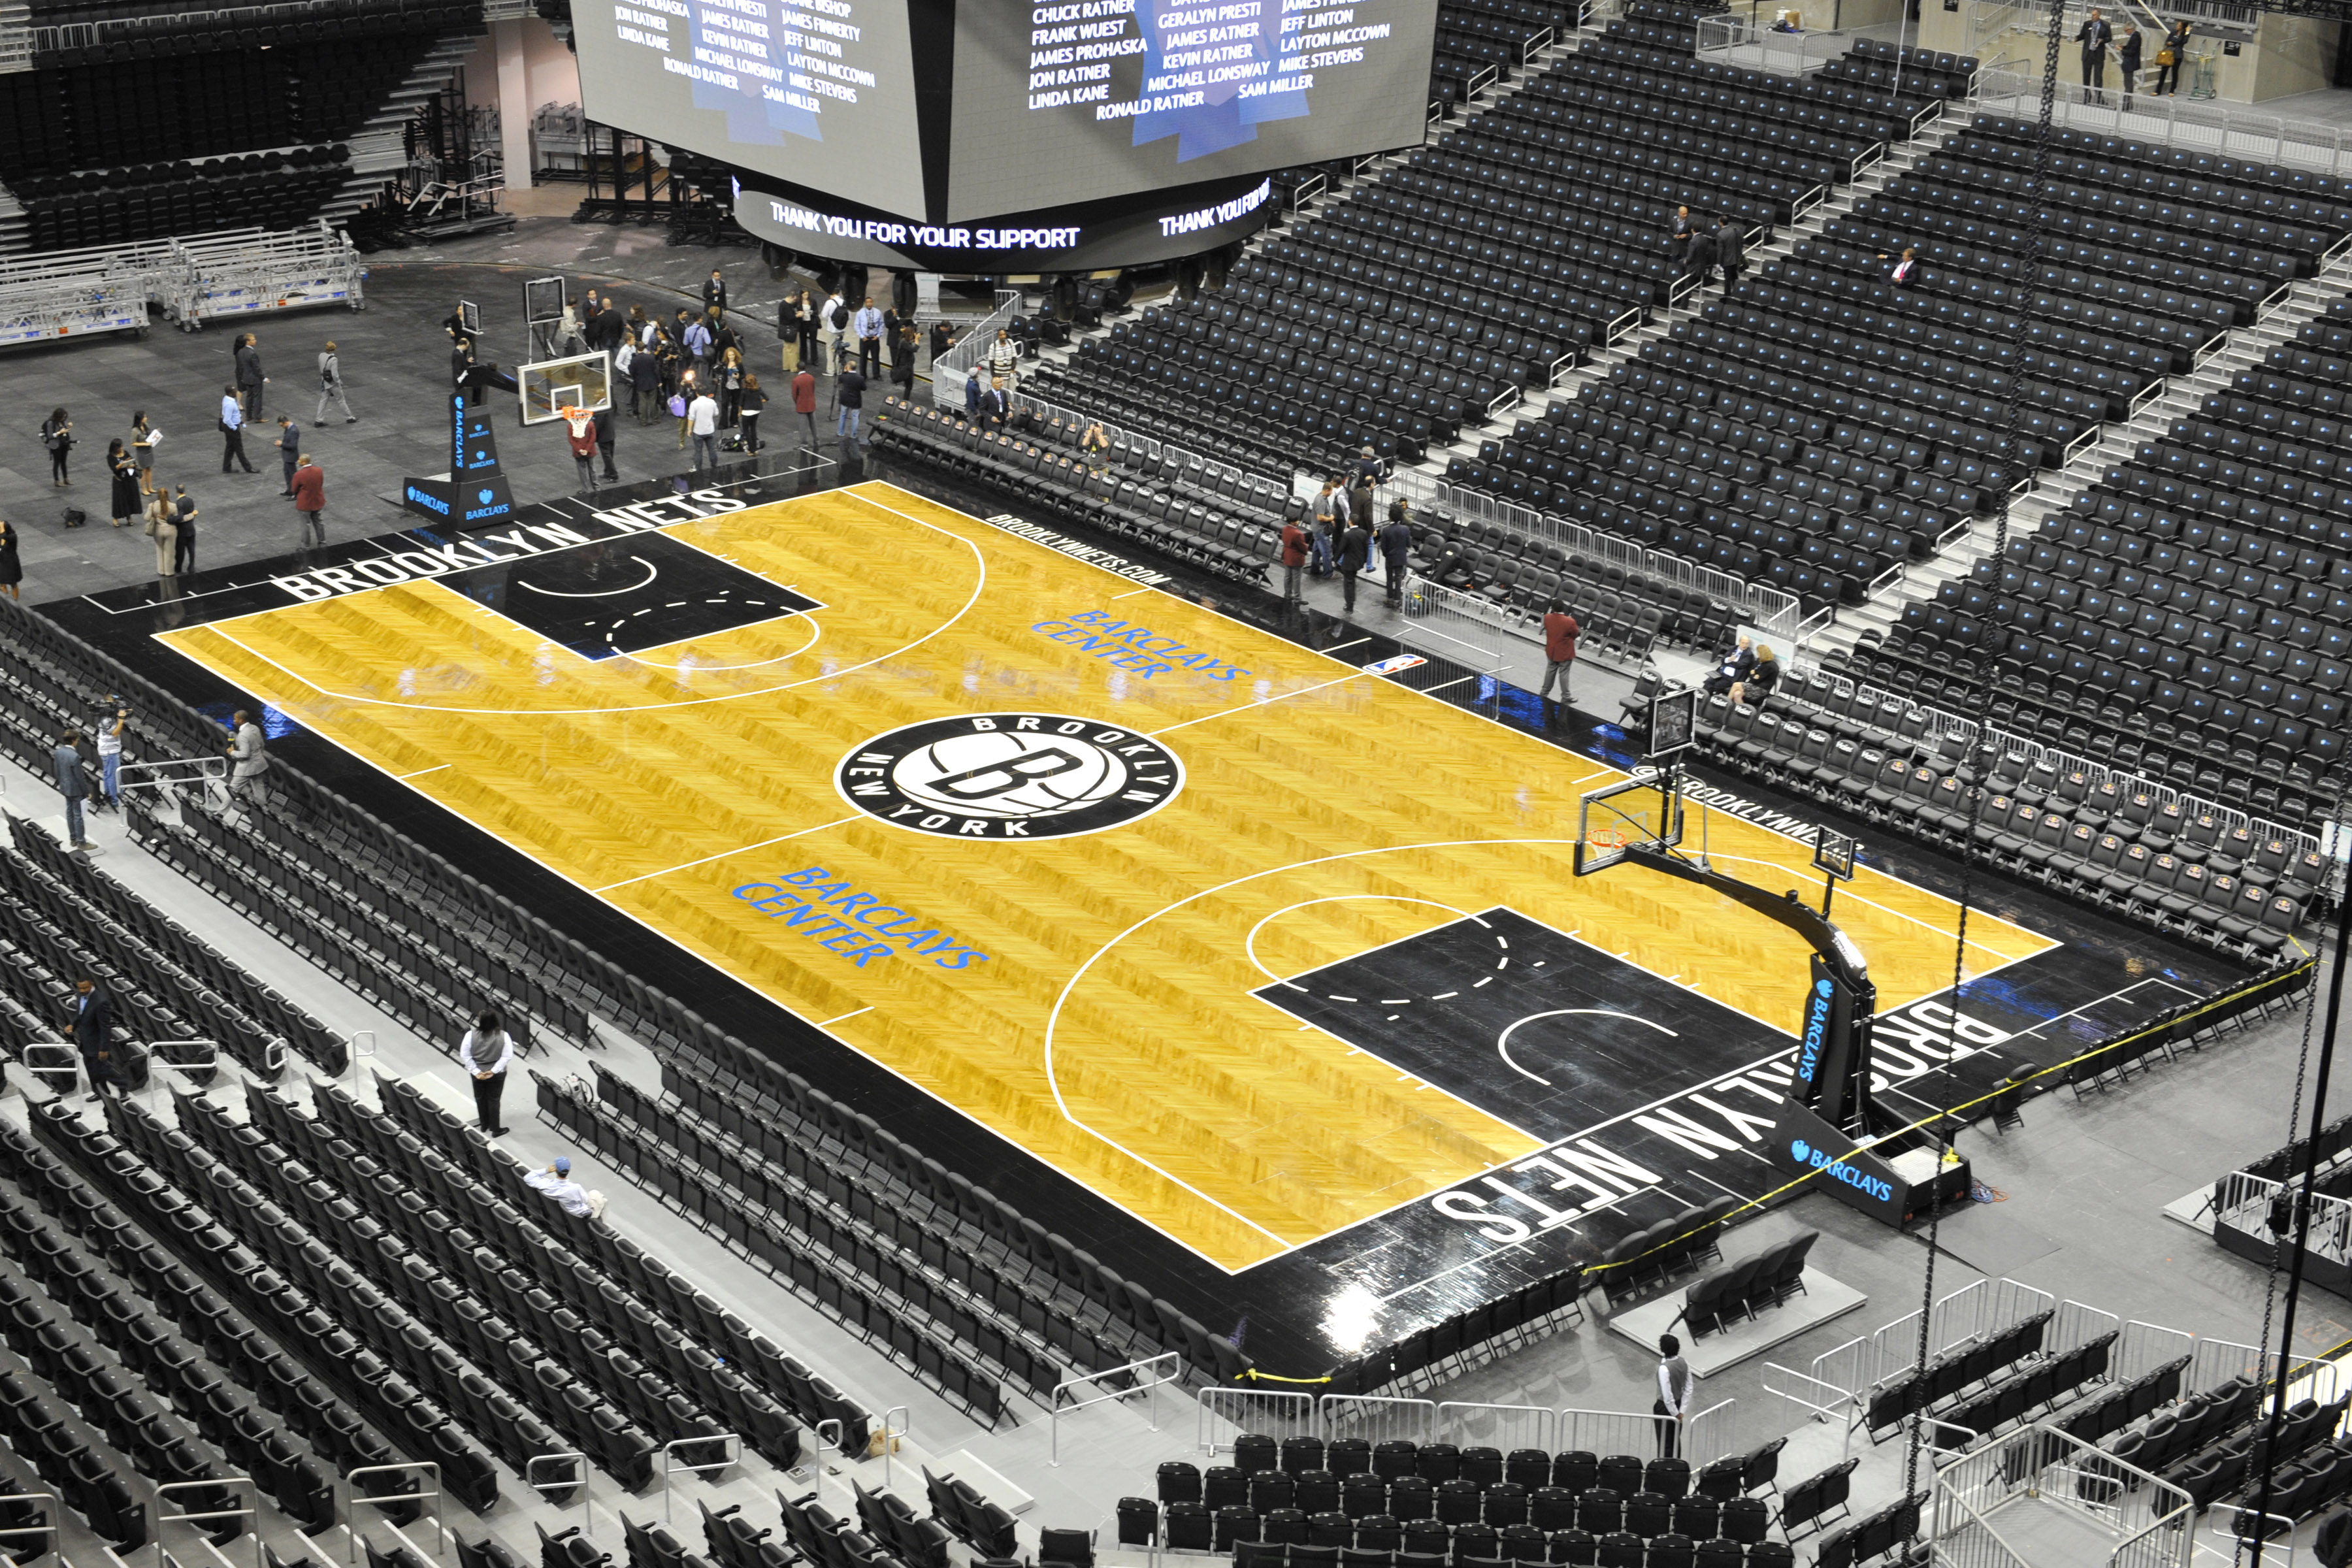 Barclays Center 3d Seating Chart